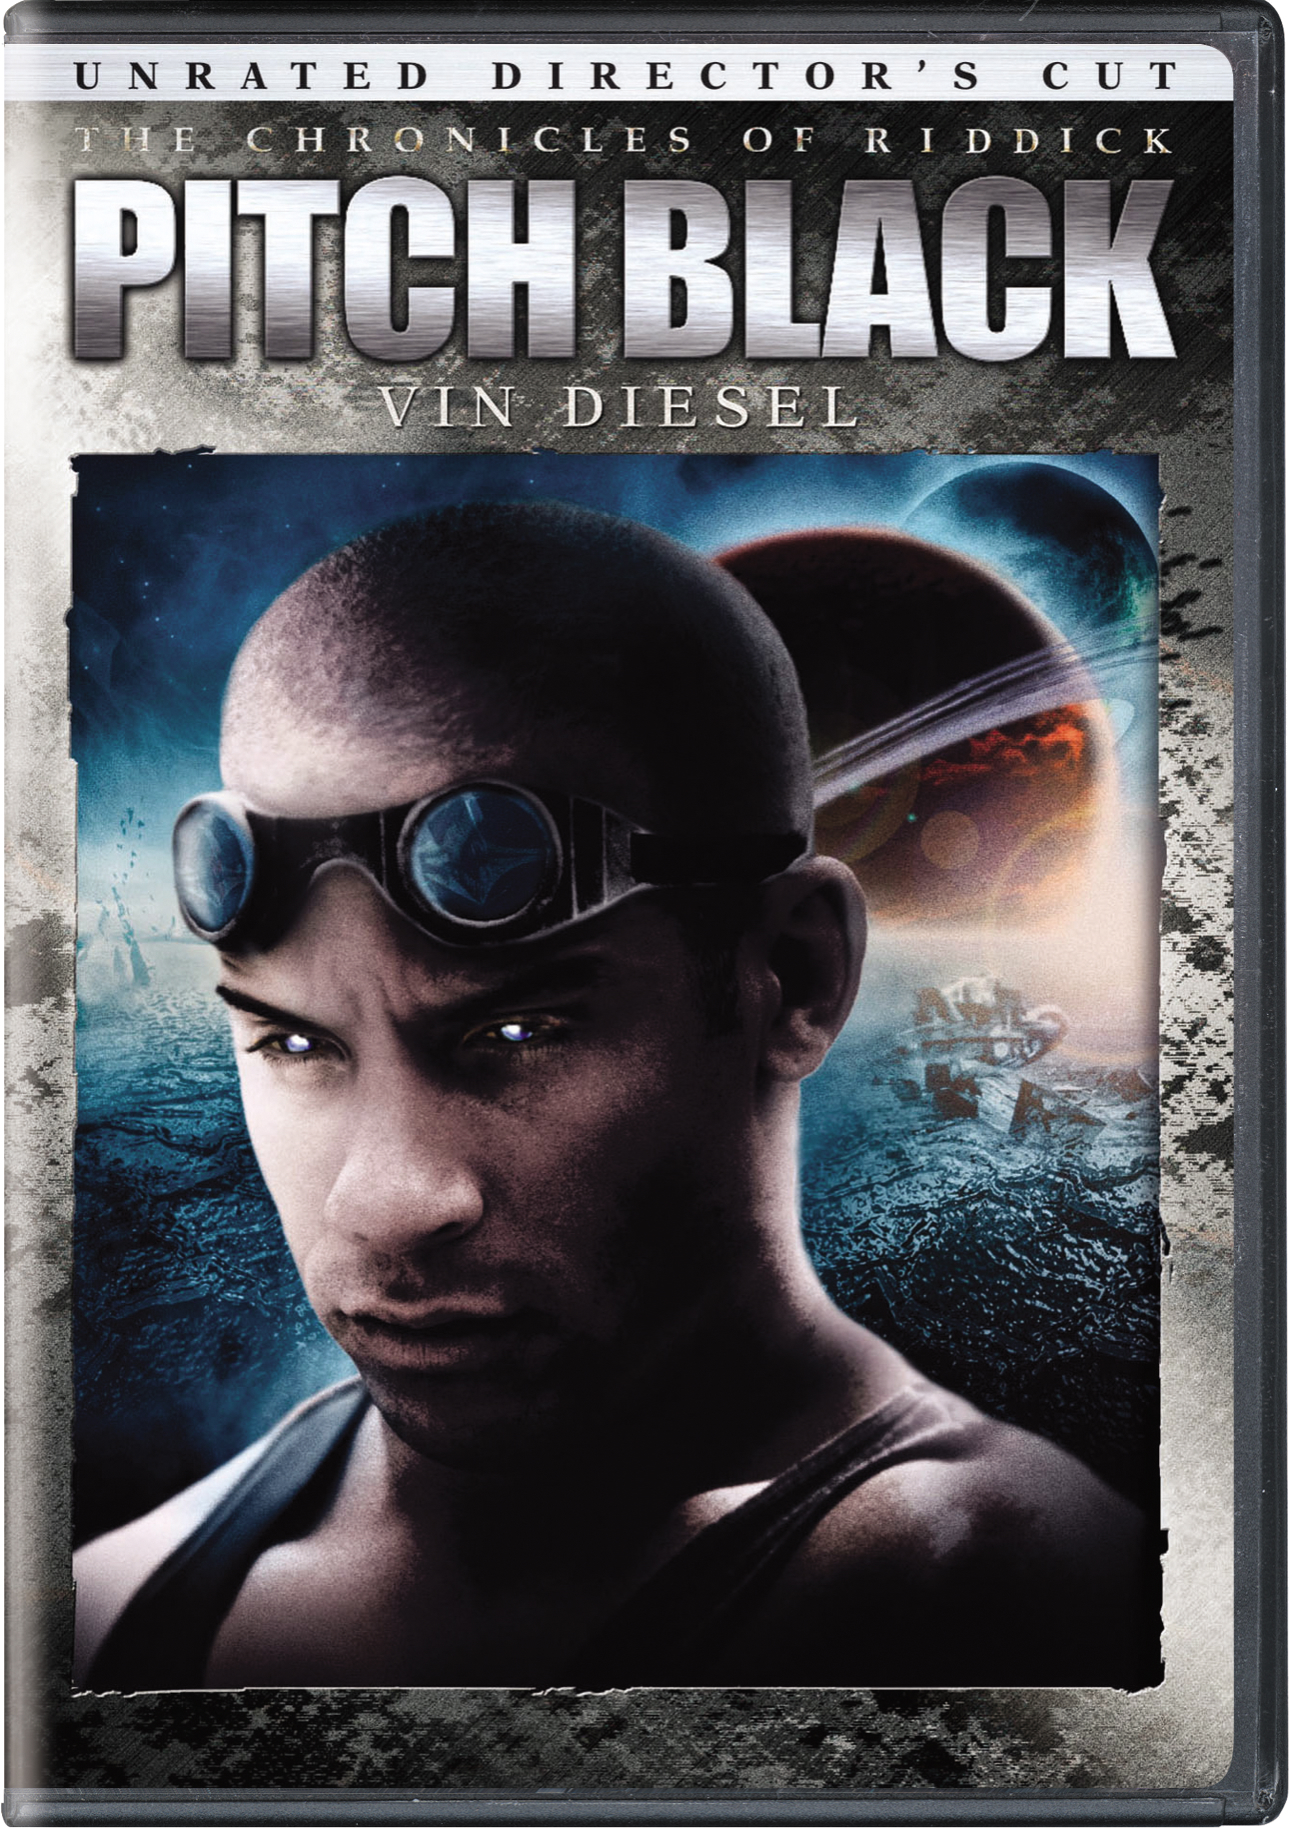 Pitch Black (DVD Widescreen Director's Cut) - DVD [ 2000 ]  - Sci Fi Movies On DVD - Movies On GRUV